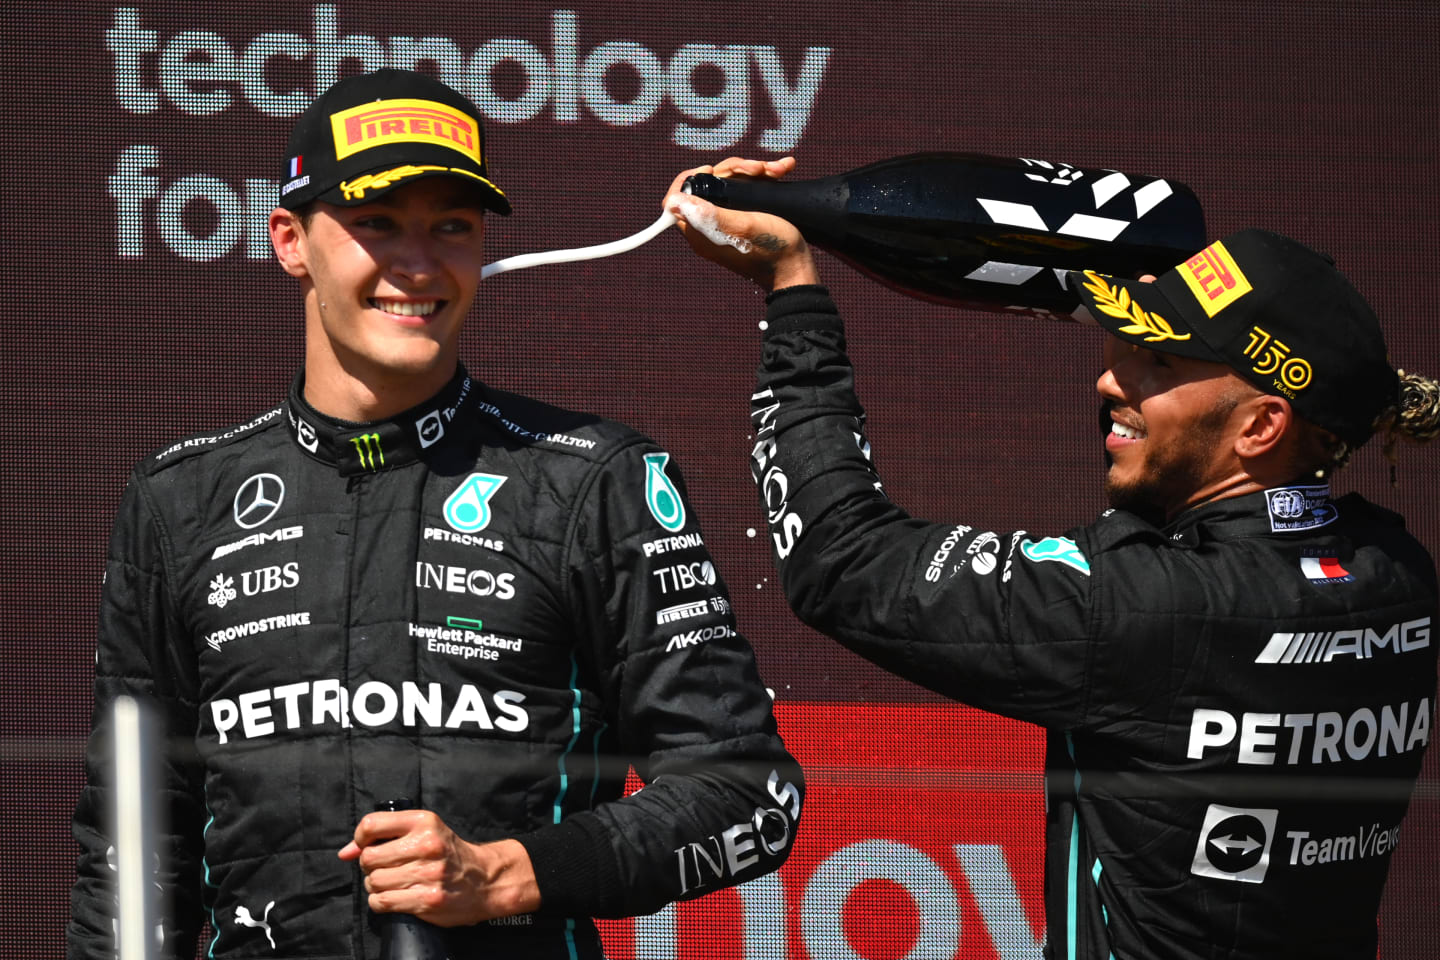 LE CASTELLET, FRANCE - JULY 24: Second placed Lewis Hamilton of Great Britain and Mercedes and